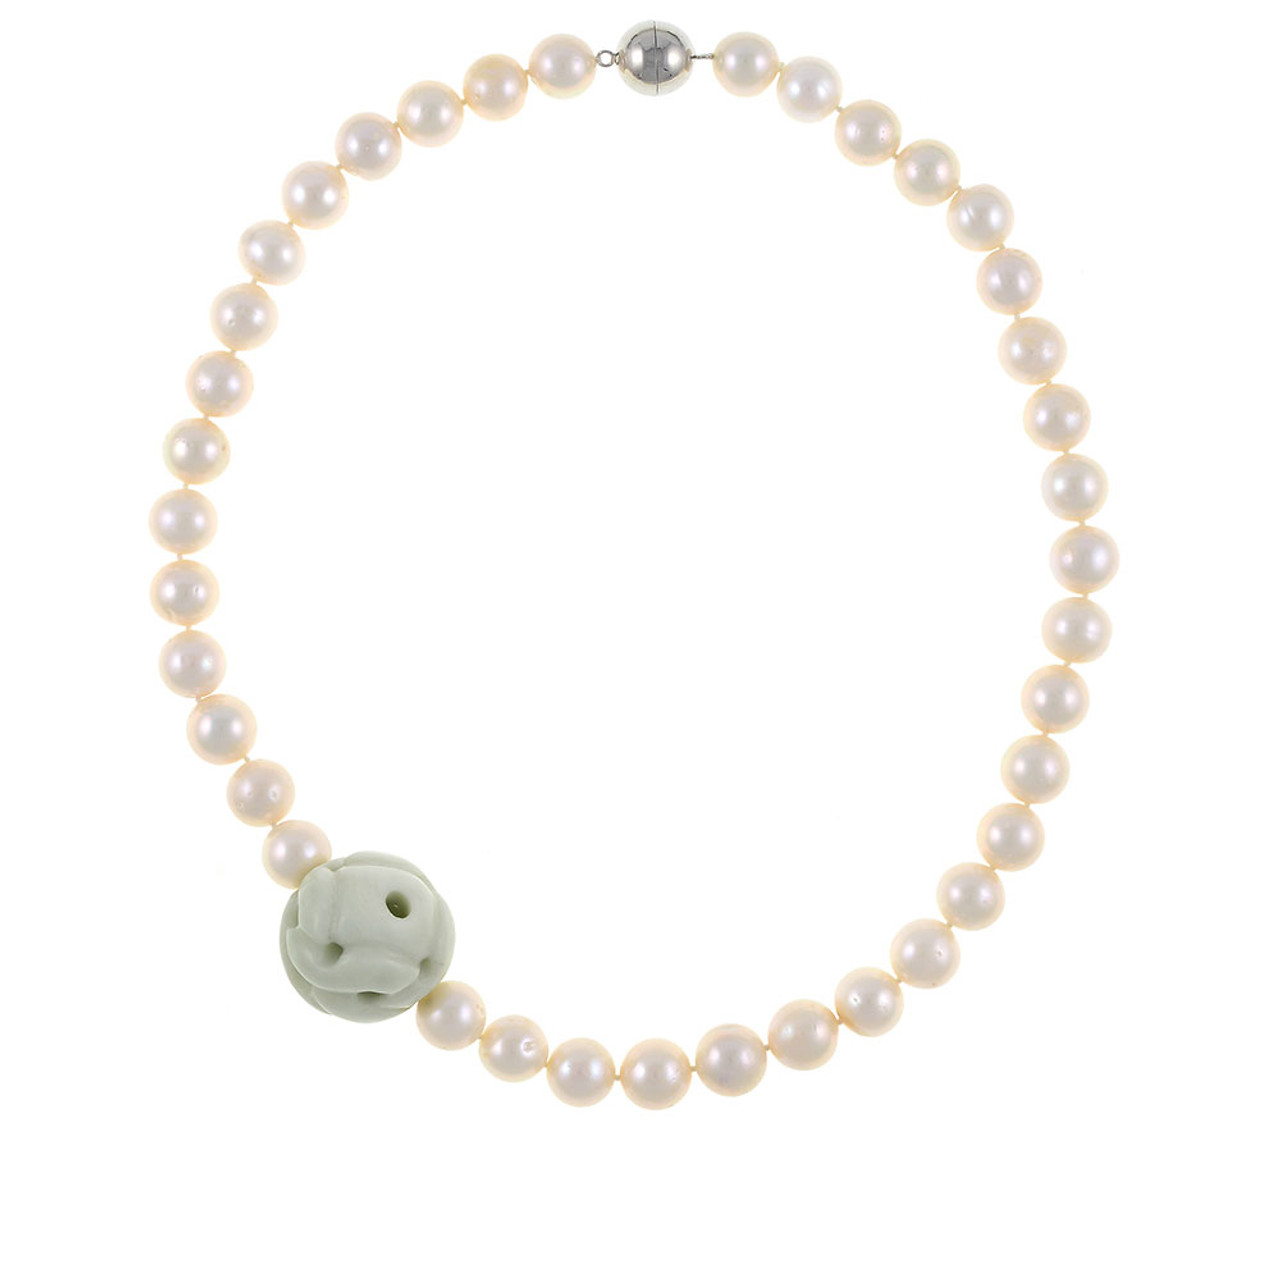 Vintage Jade Pearl Necklace Selected by The Curatorial Dept. | Free People